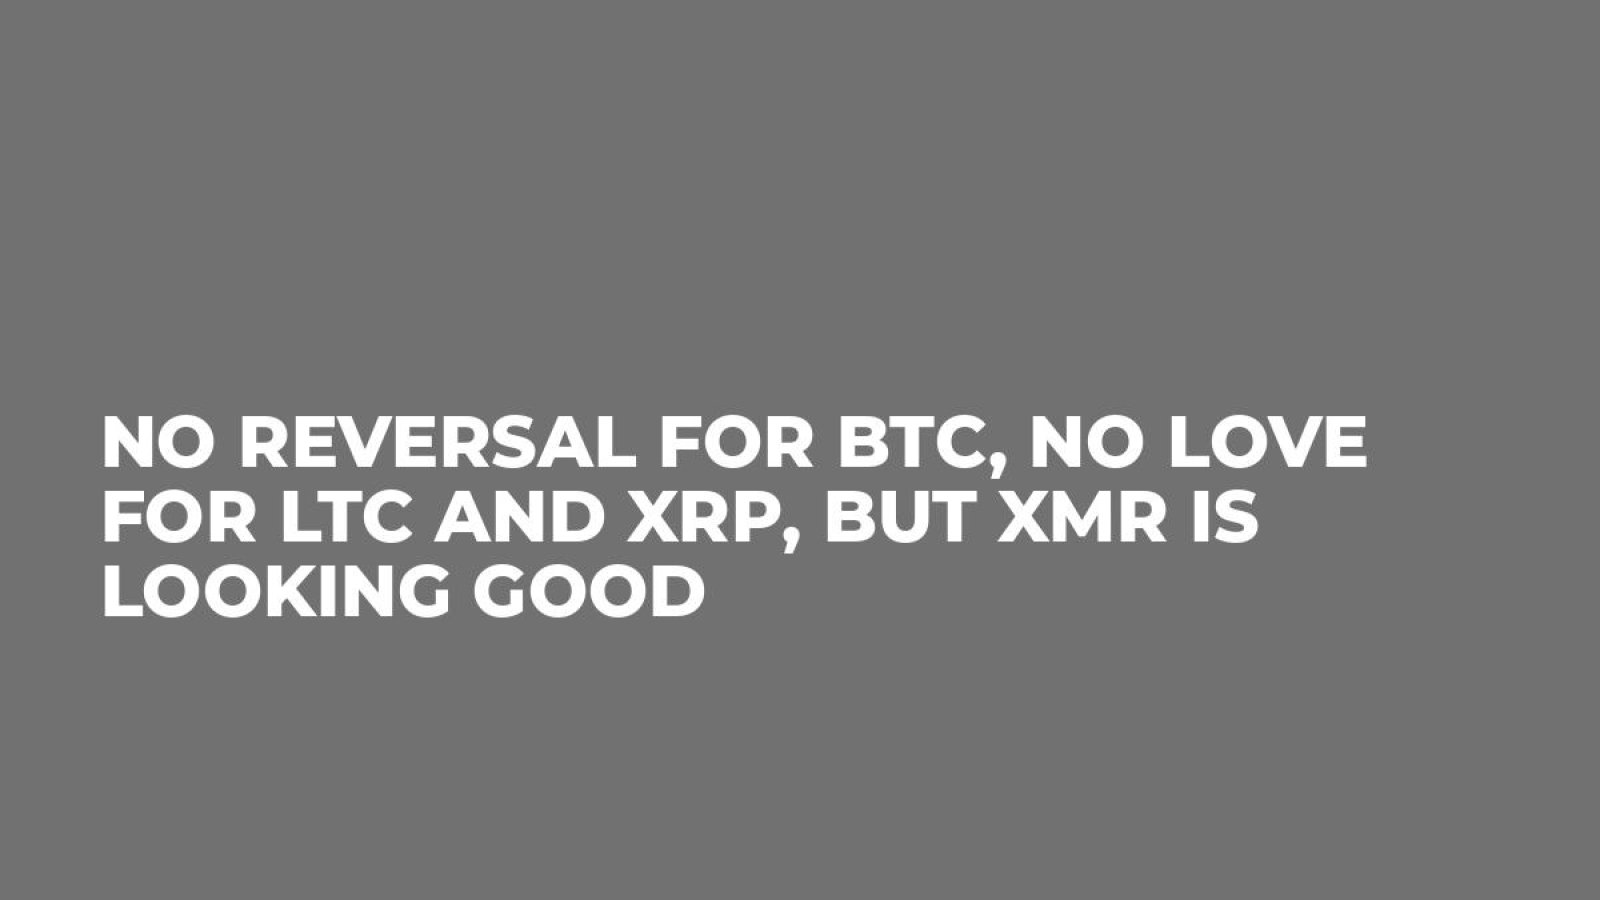 No Reversal for BTC, No Love for LTC and XRP, but XMR is Looking Good